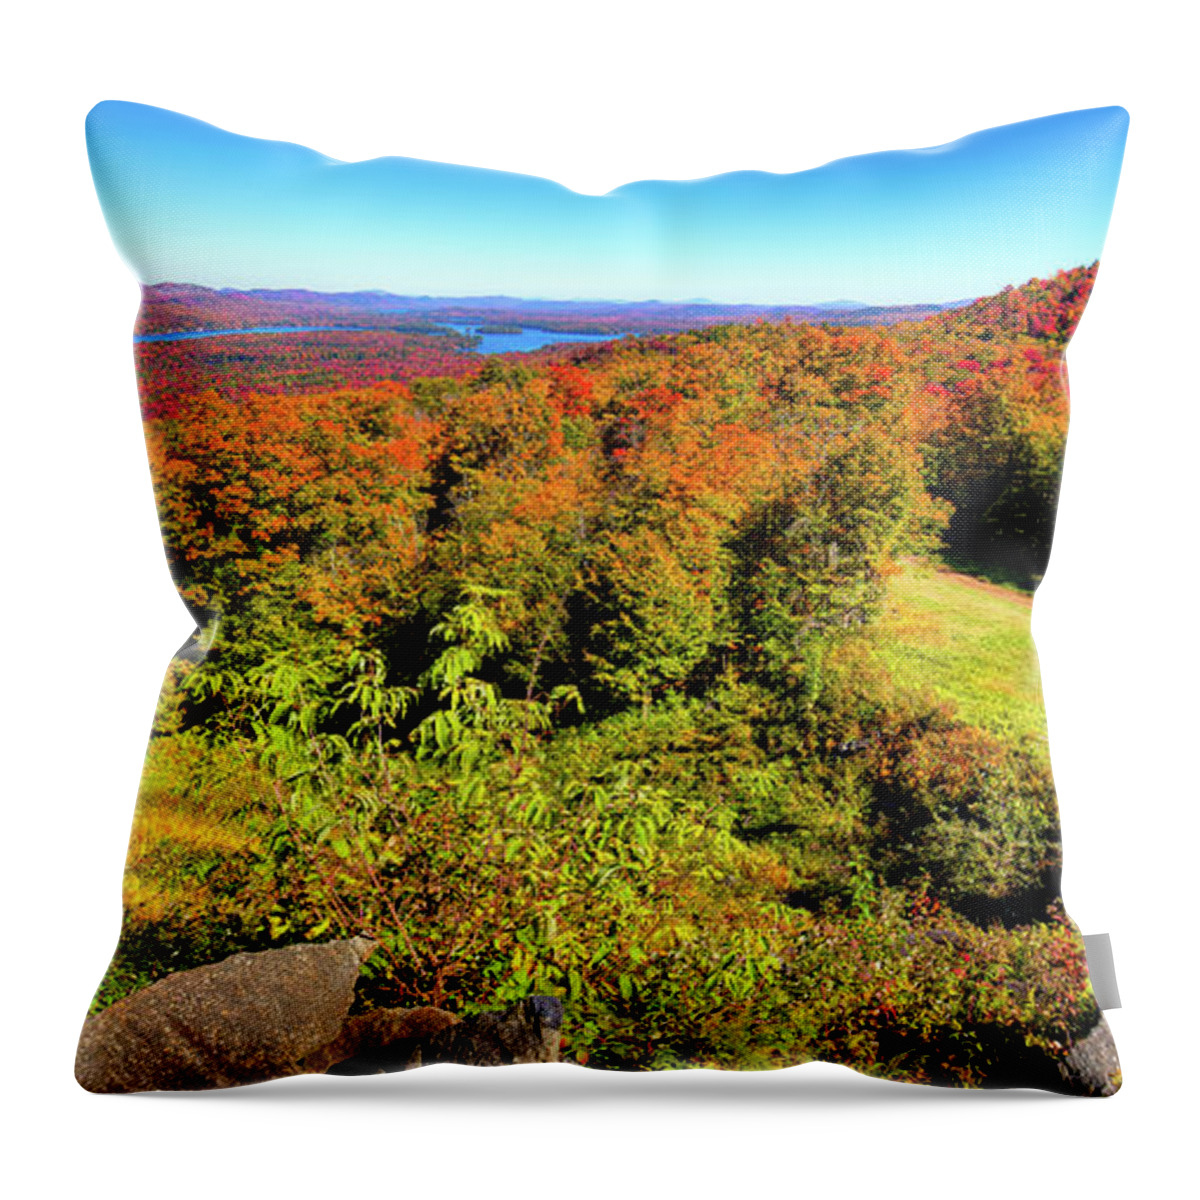 Autumn Landscapes Throw Pillow featuring the photograph Autumn View from McCauley Mountain by David Patterson